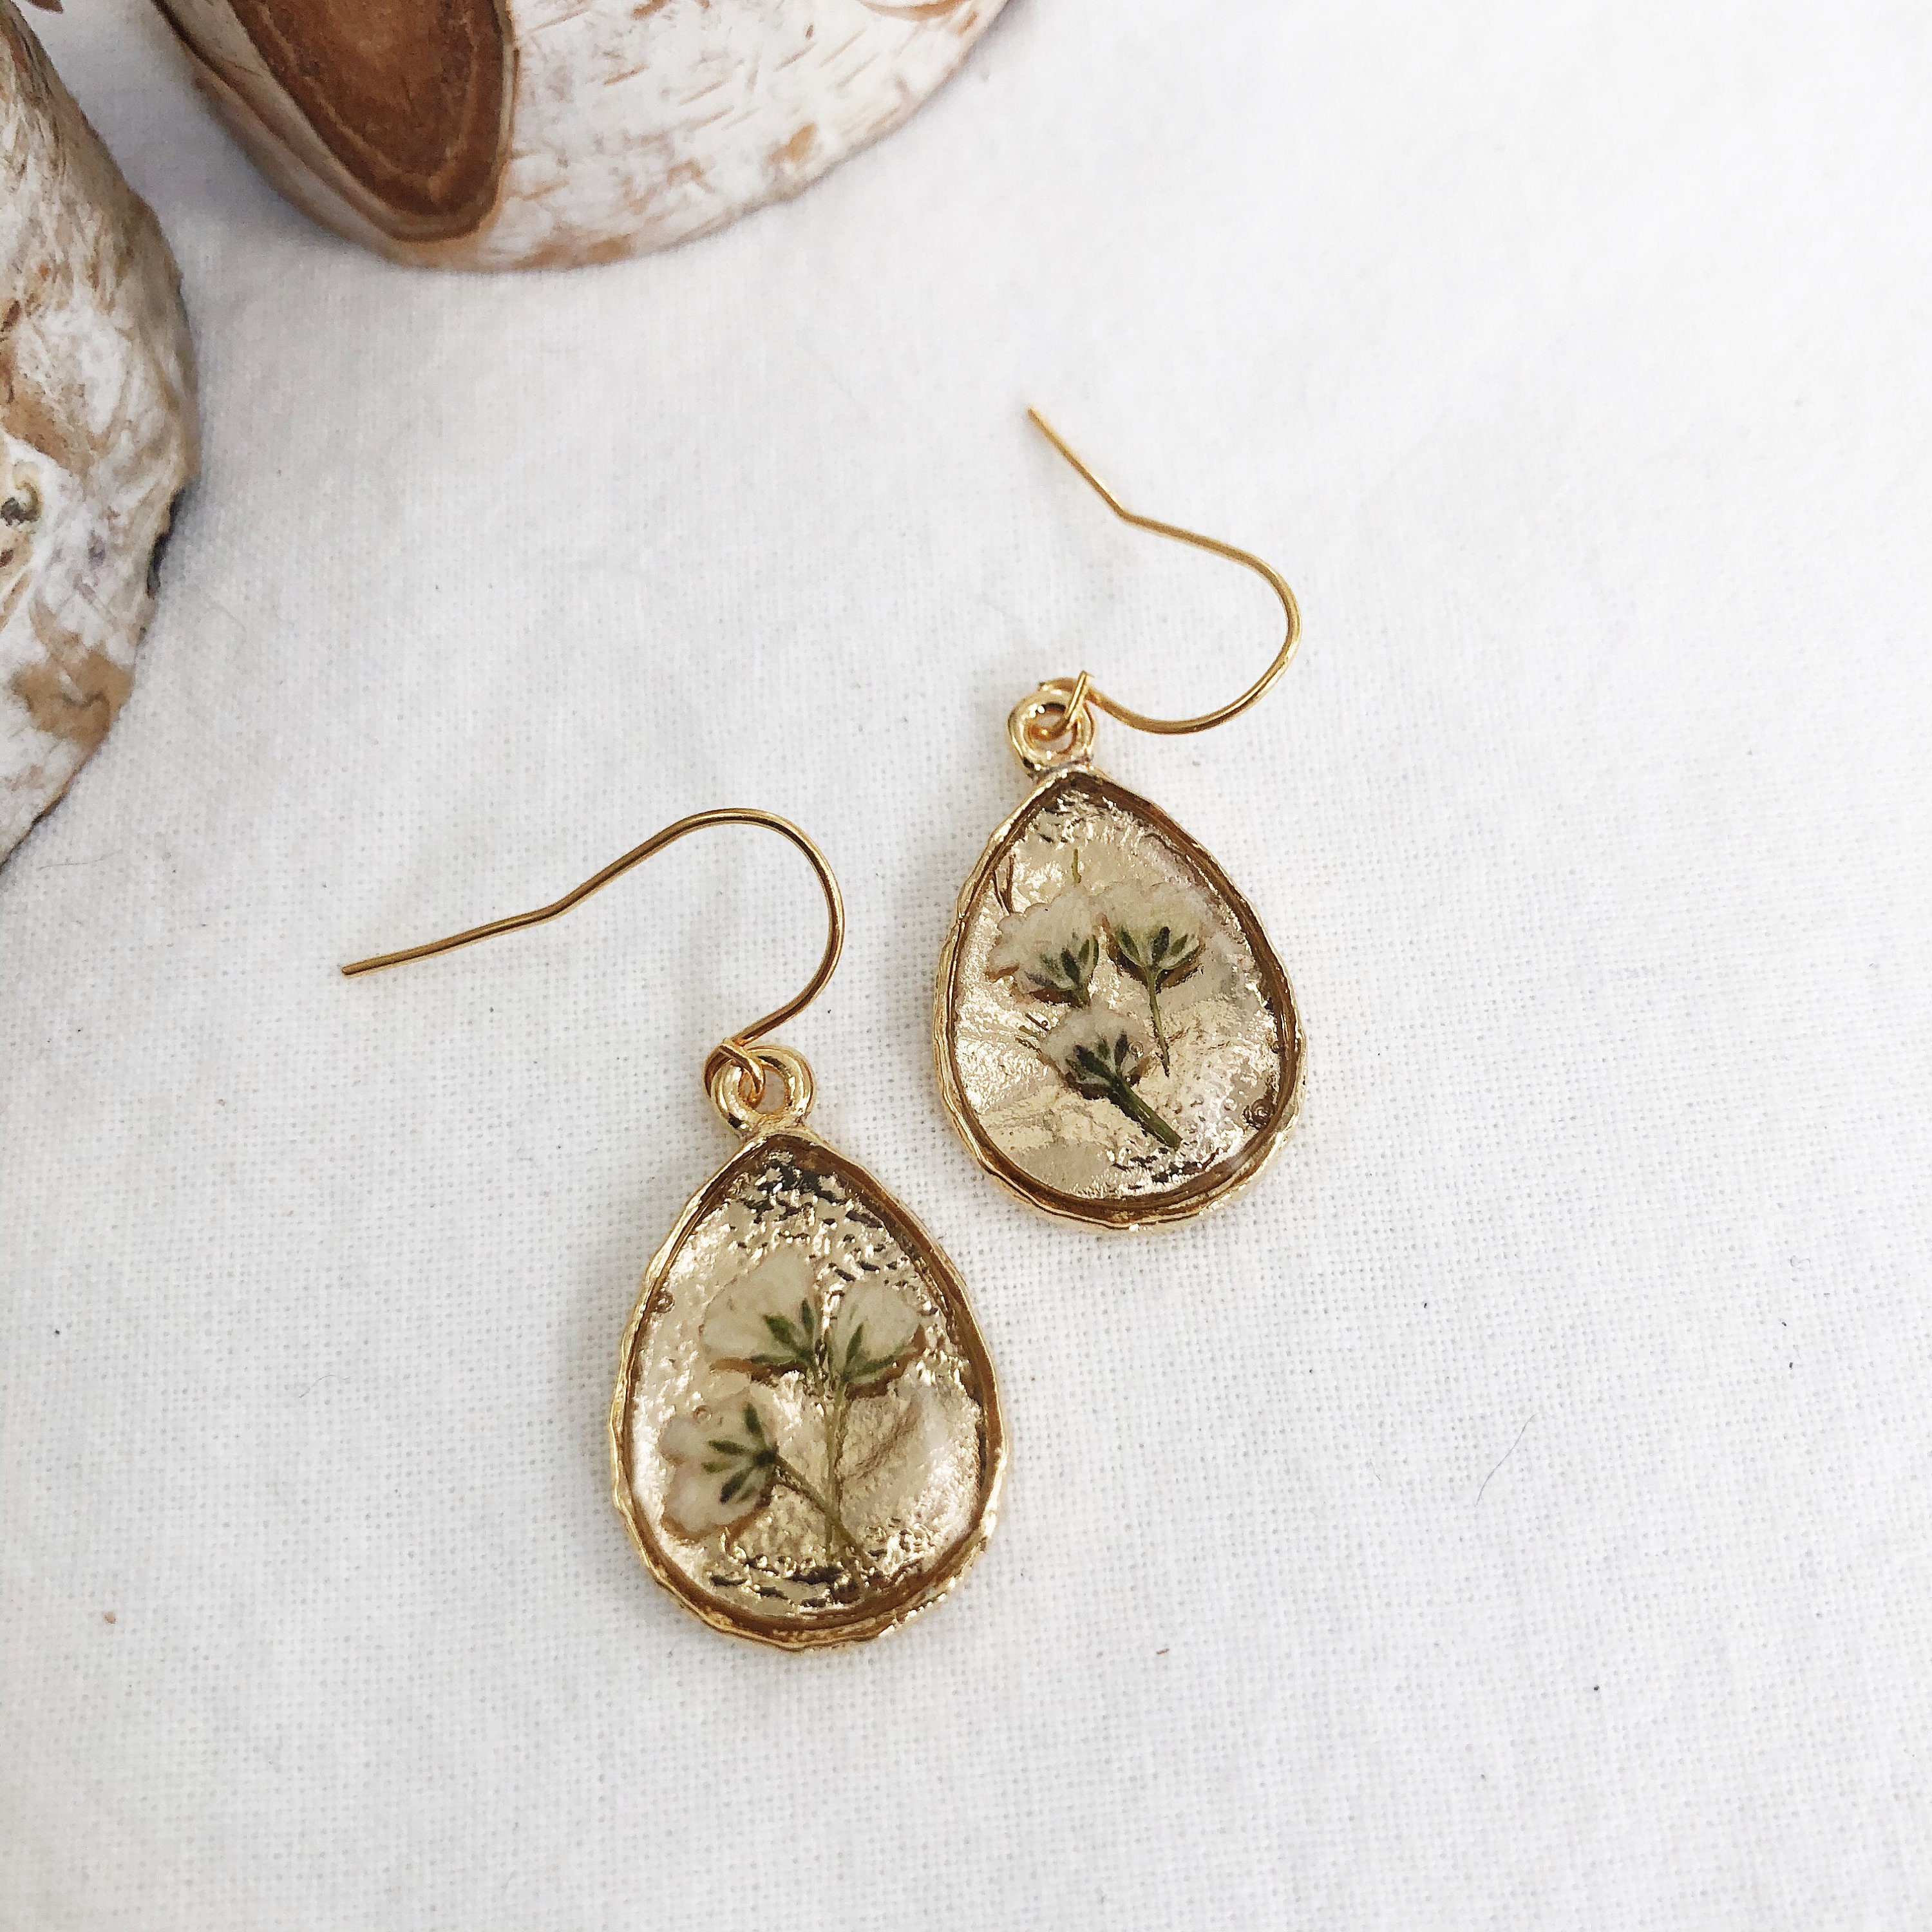 Beautiful Baby’s Breath Earrings for Plant-Loving Chicks